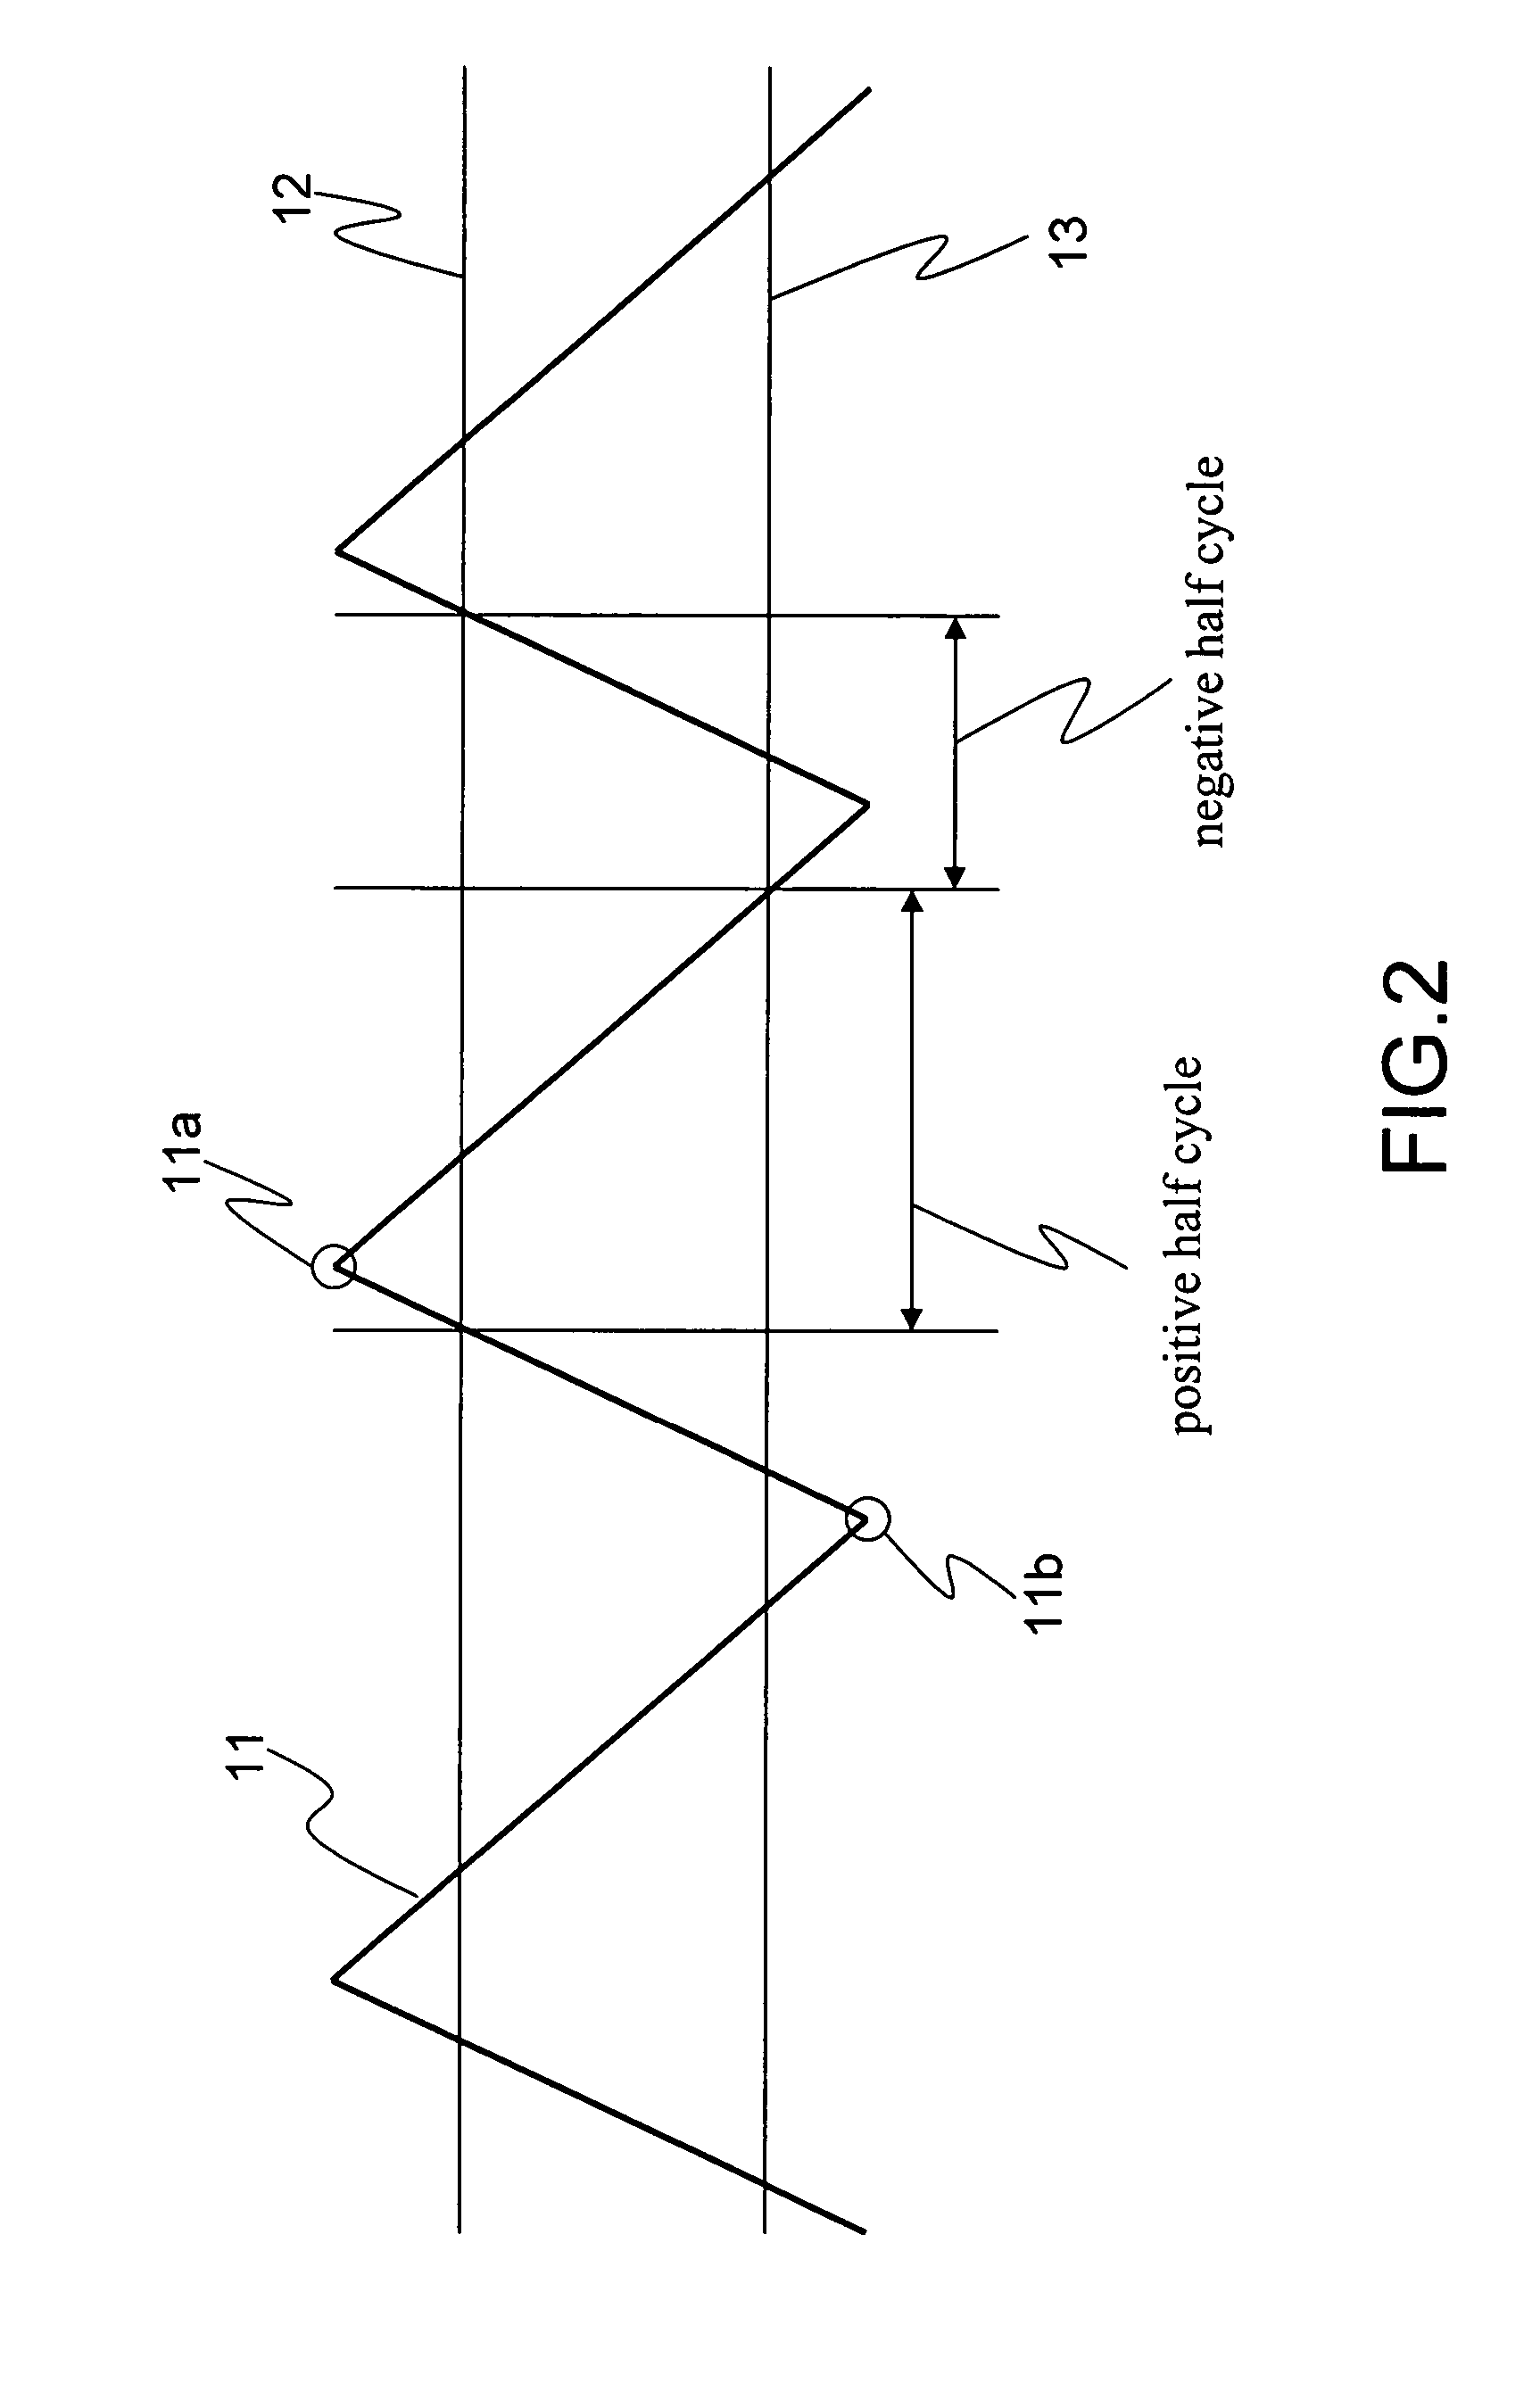 Method of detecting phase-loss state of three-phase power supply